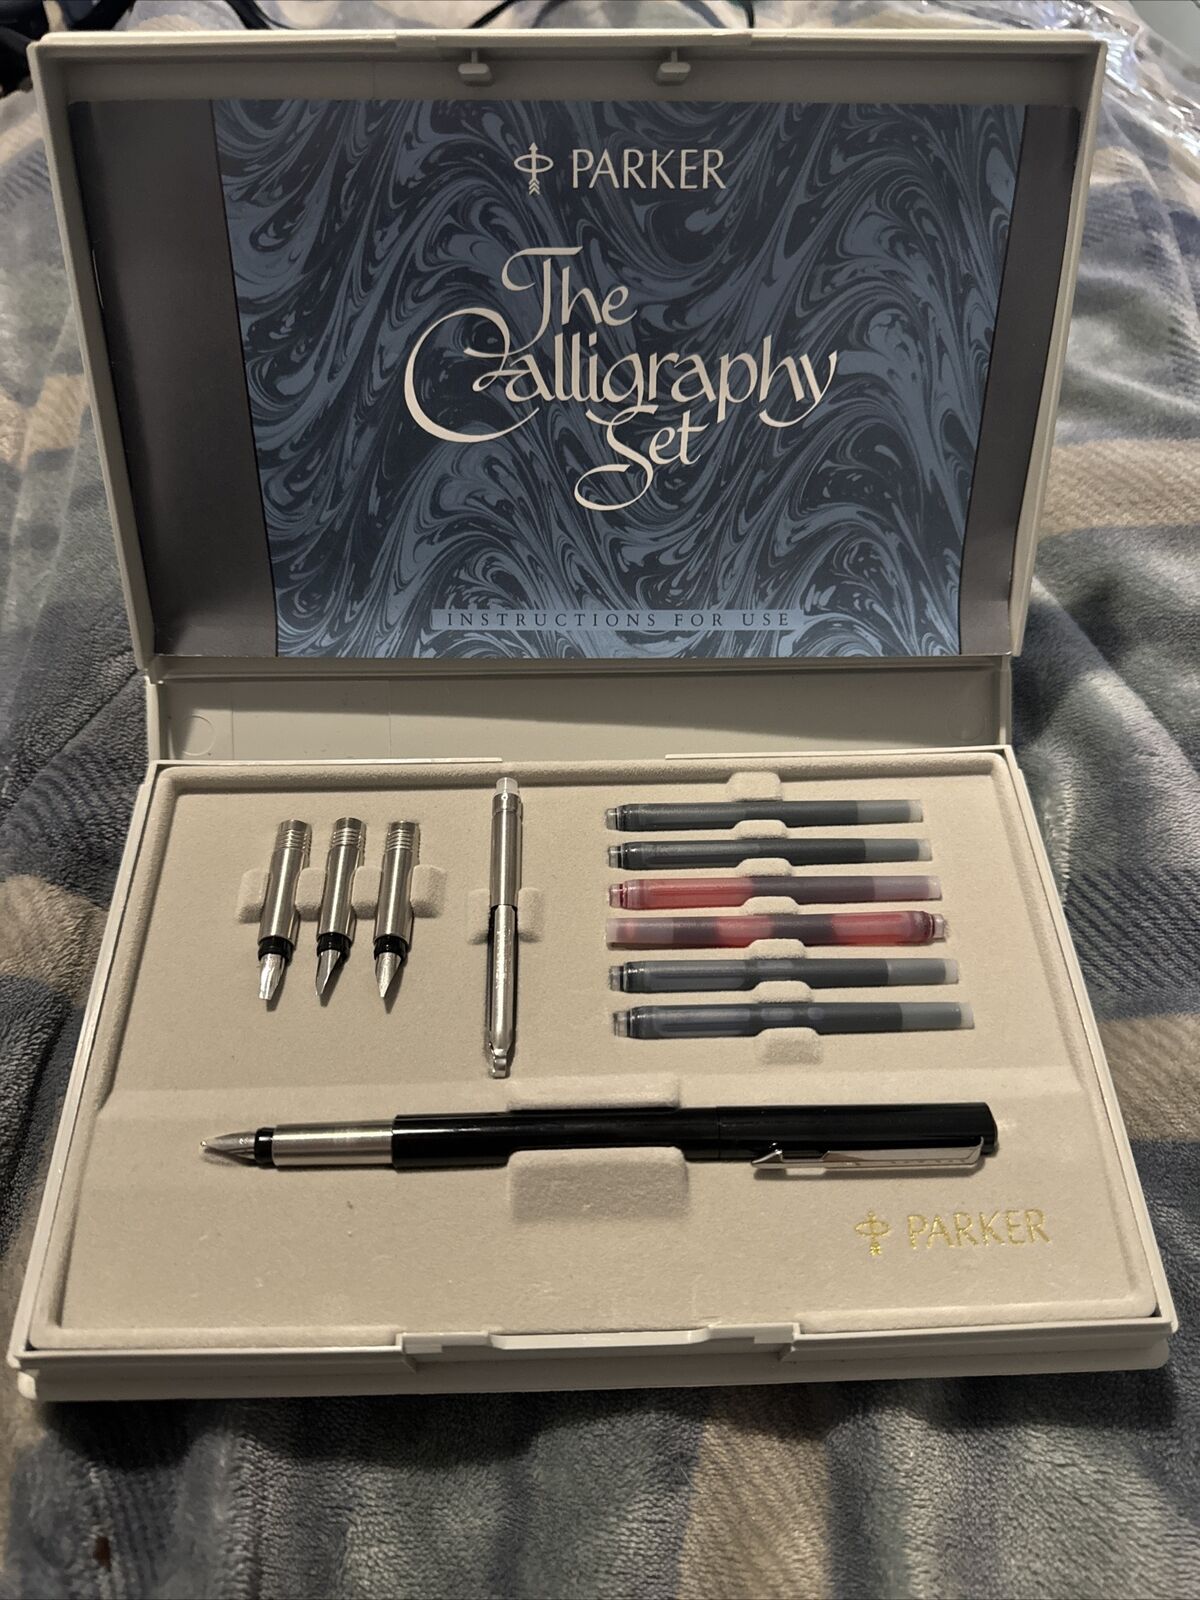 Vintage Parker Fountain Pen Tips - Calligraphy Deluxe Set in Box - Complete-